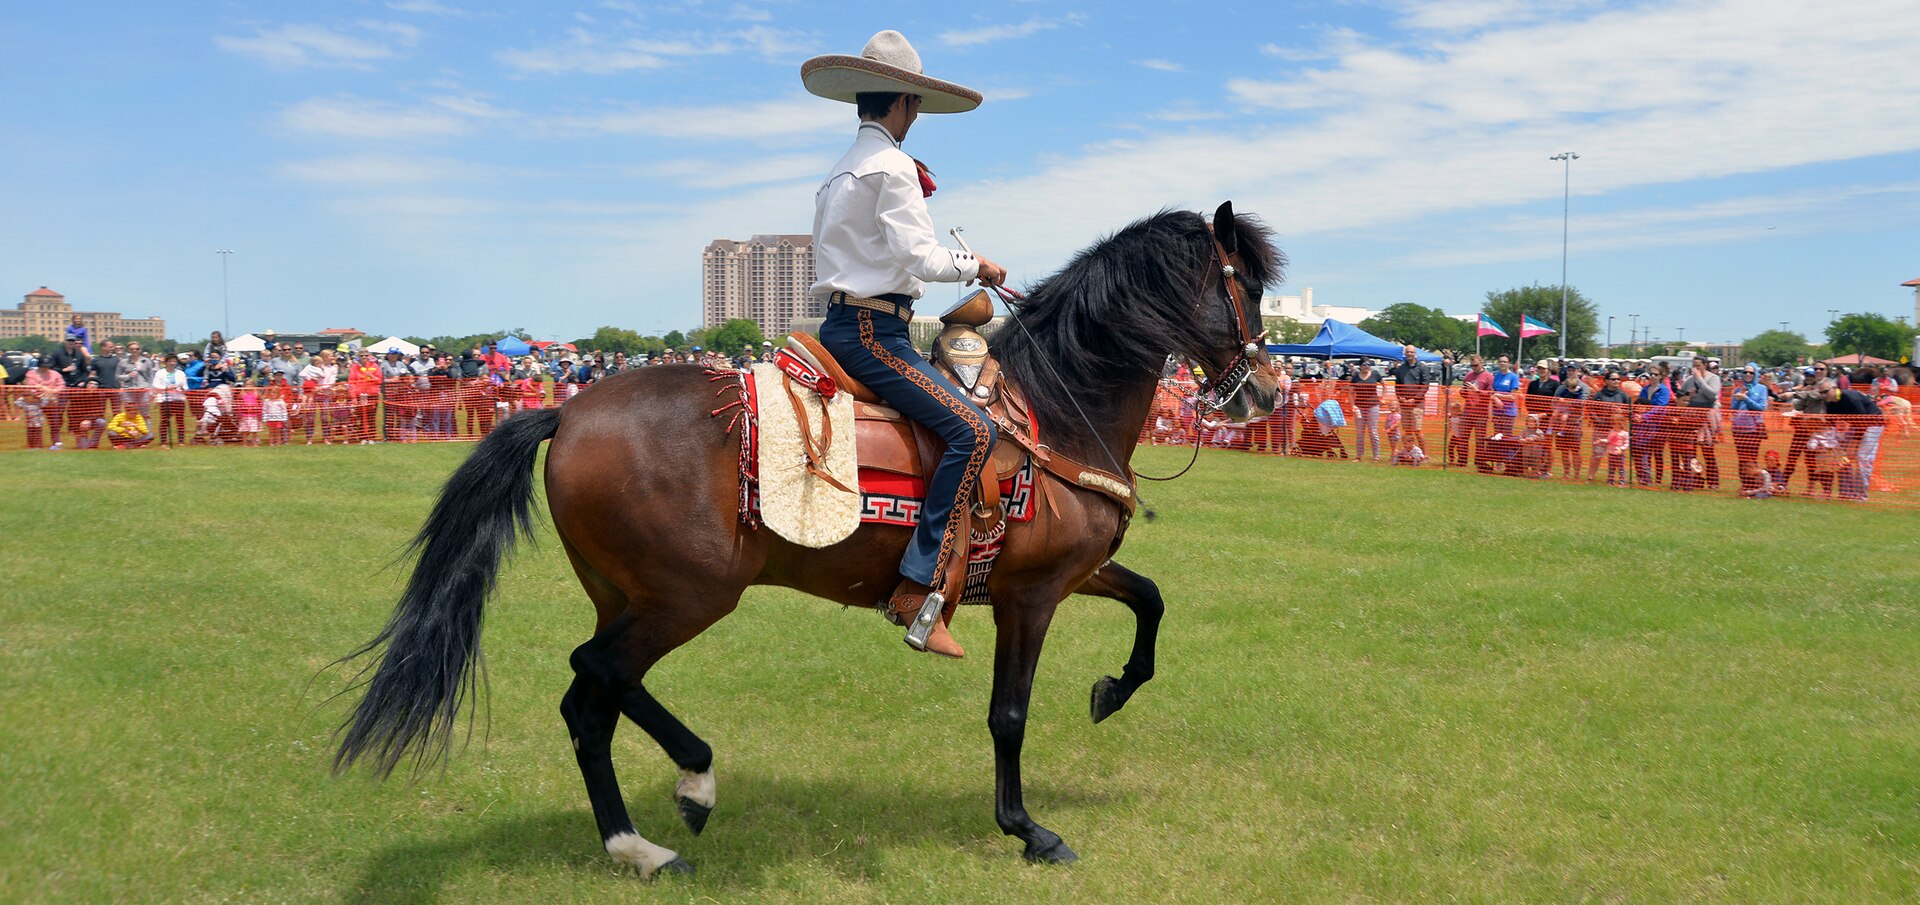 Impressive feats of horsemanship were on display during exhibition of Spanish horses during the annual Cowboys and Heroes event held at MacArthur Parade Field at Joint Base San Antonio-Fort Sam Houston April 14.